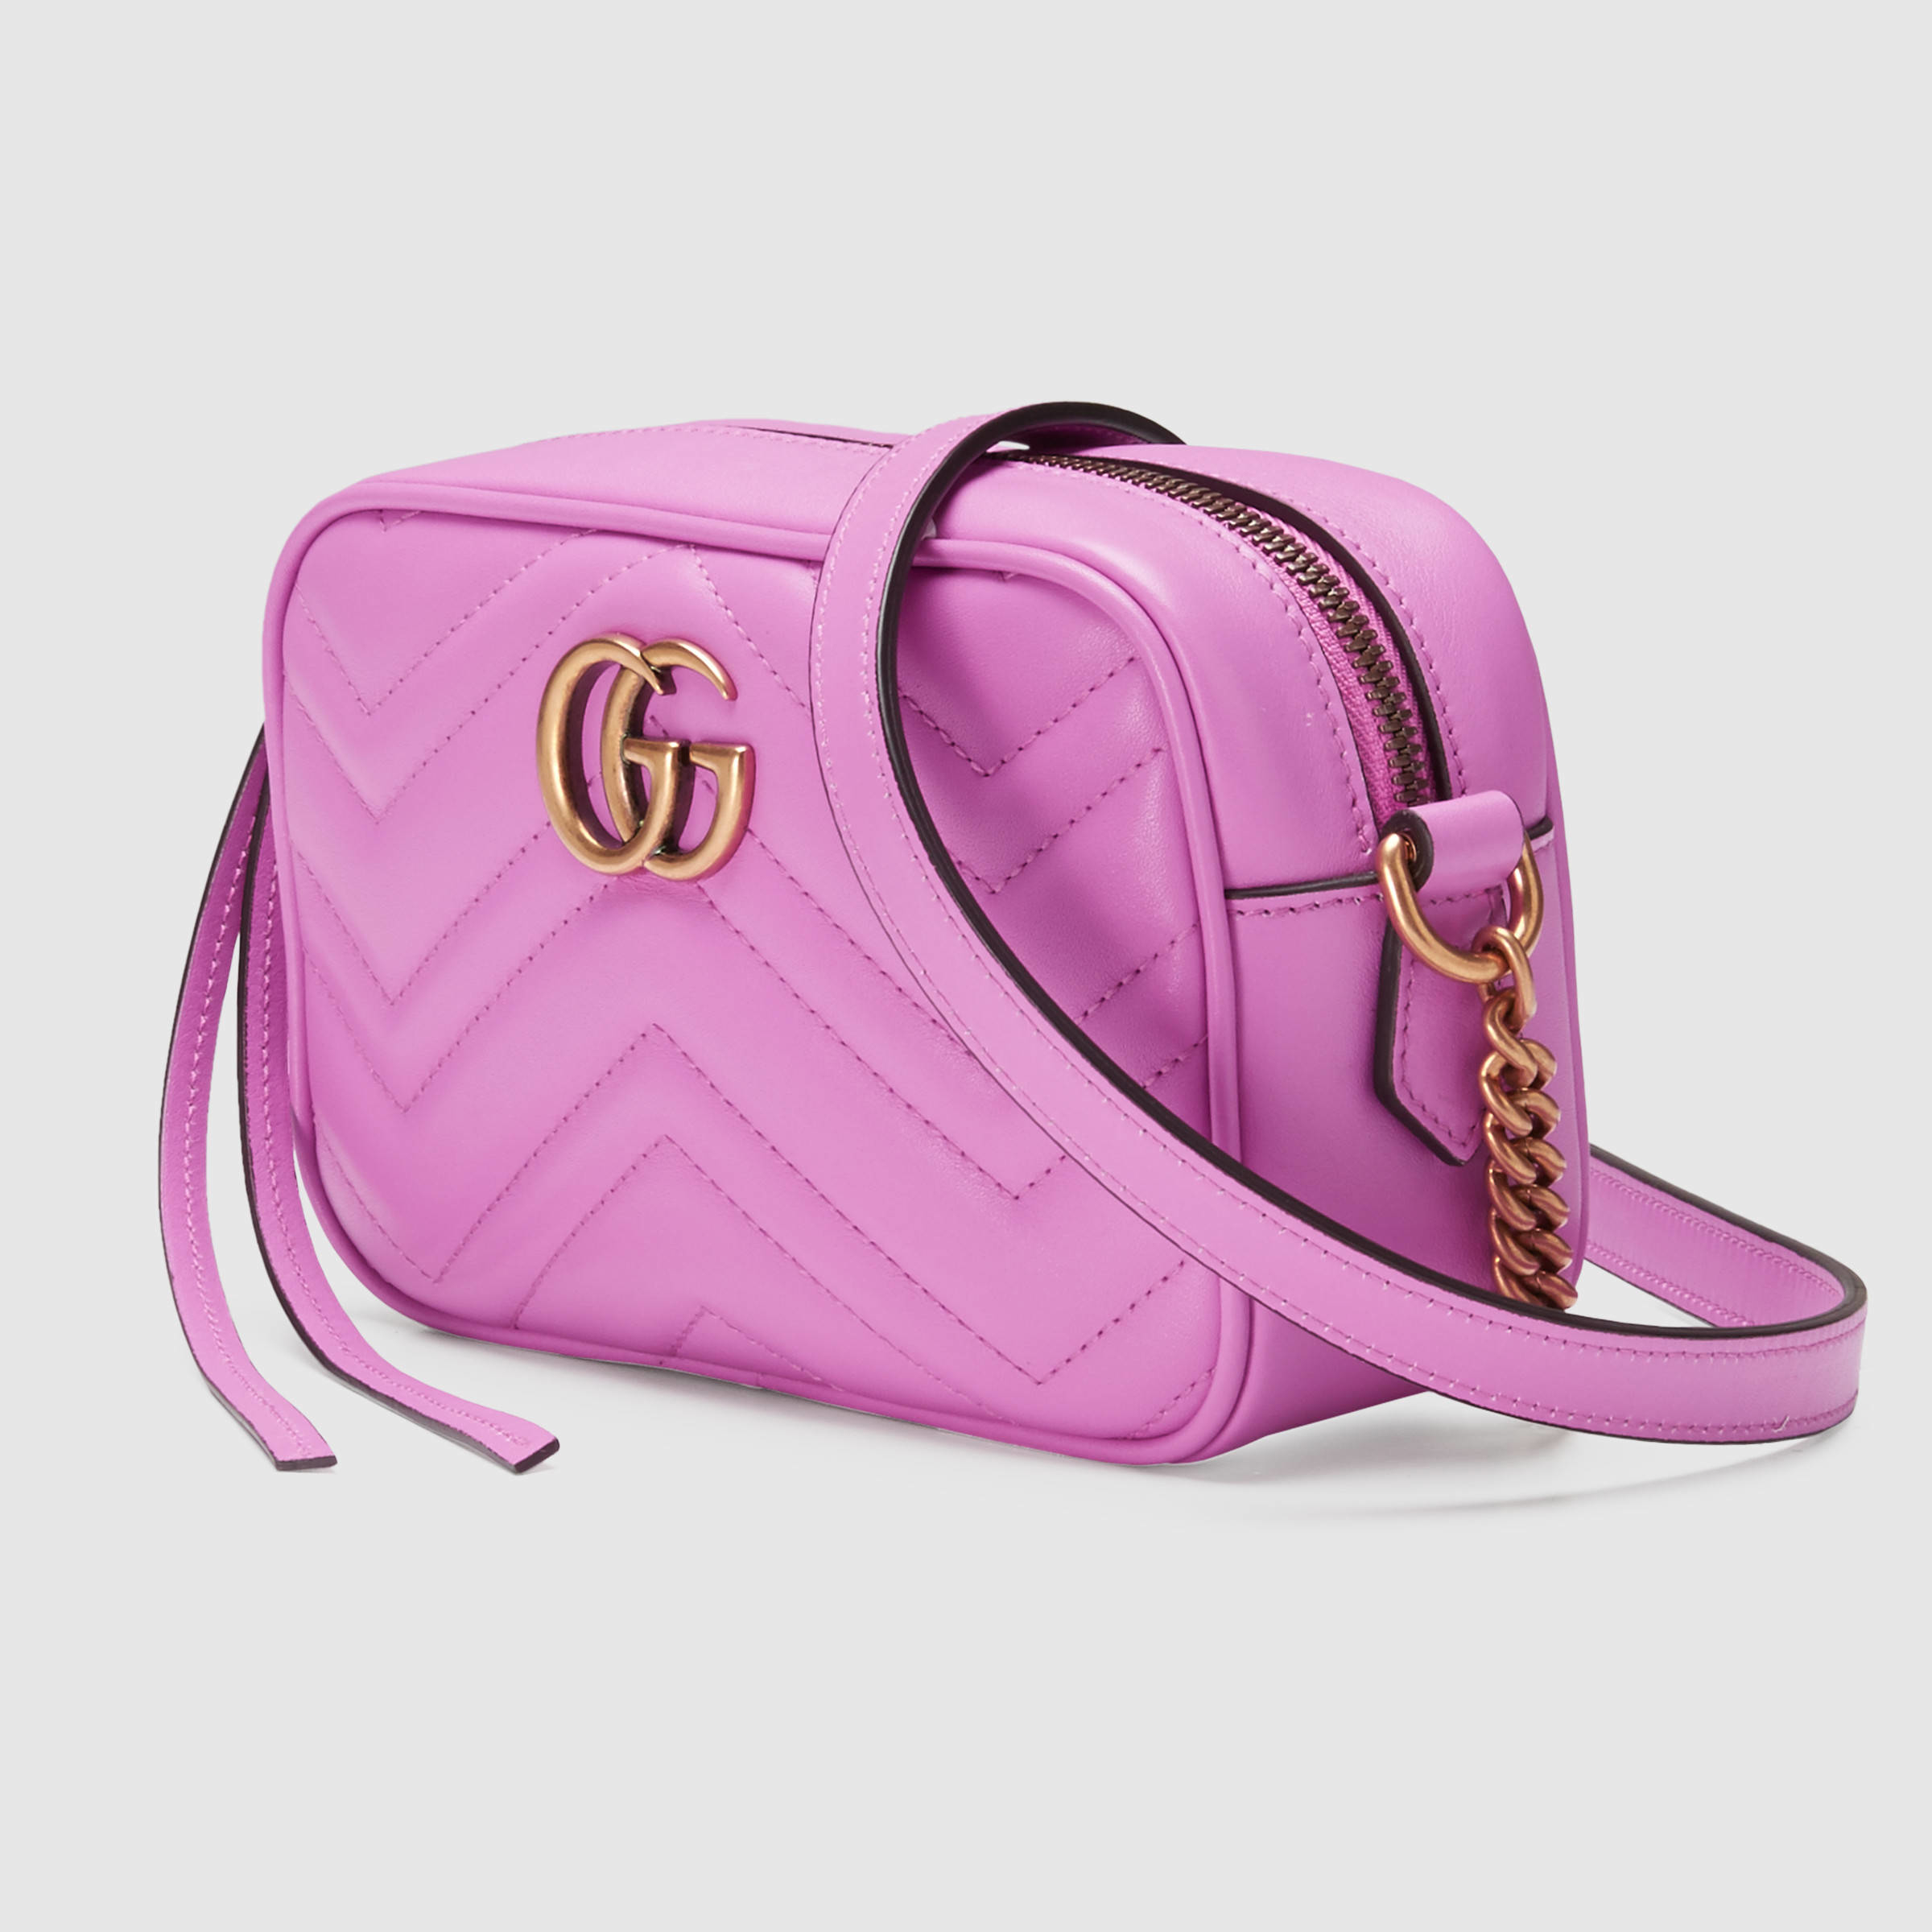 Gucci Gg Marmont Mini Chain Bag Pink With Gold Hardware | IUCN Water